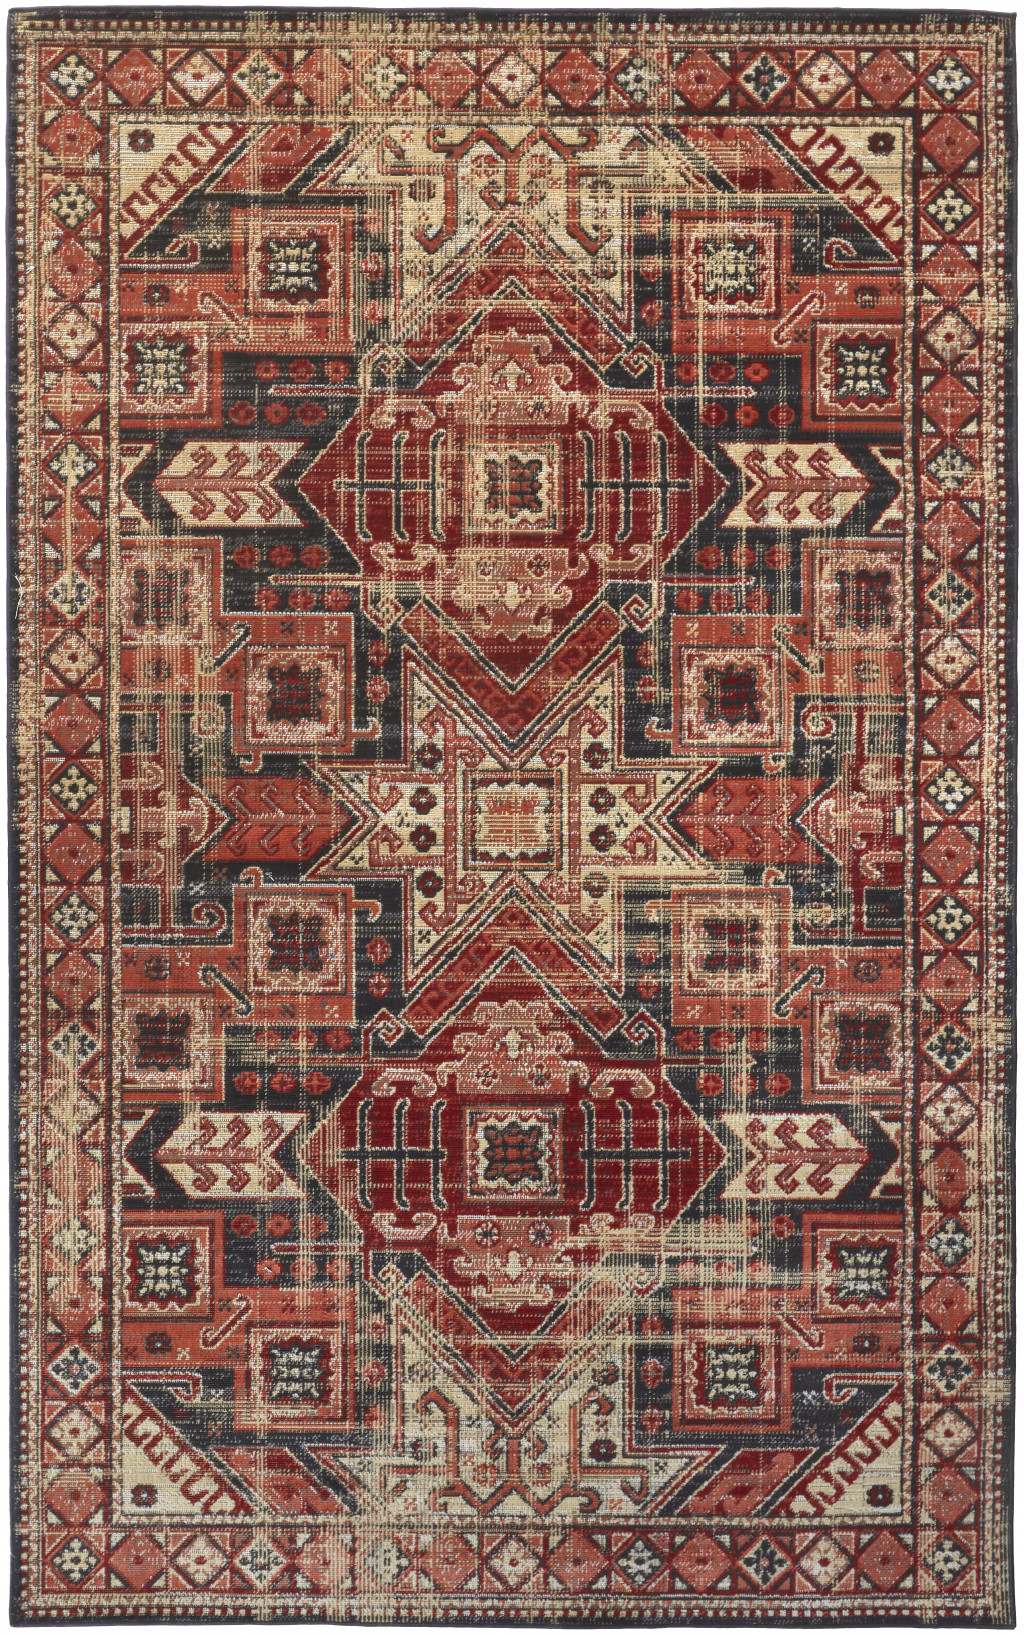 8' X 11' Red Tan And Black Abstract Power Loom Distressed Stain Resistant Area Rug-514635-1